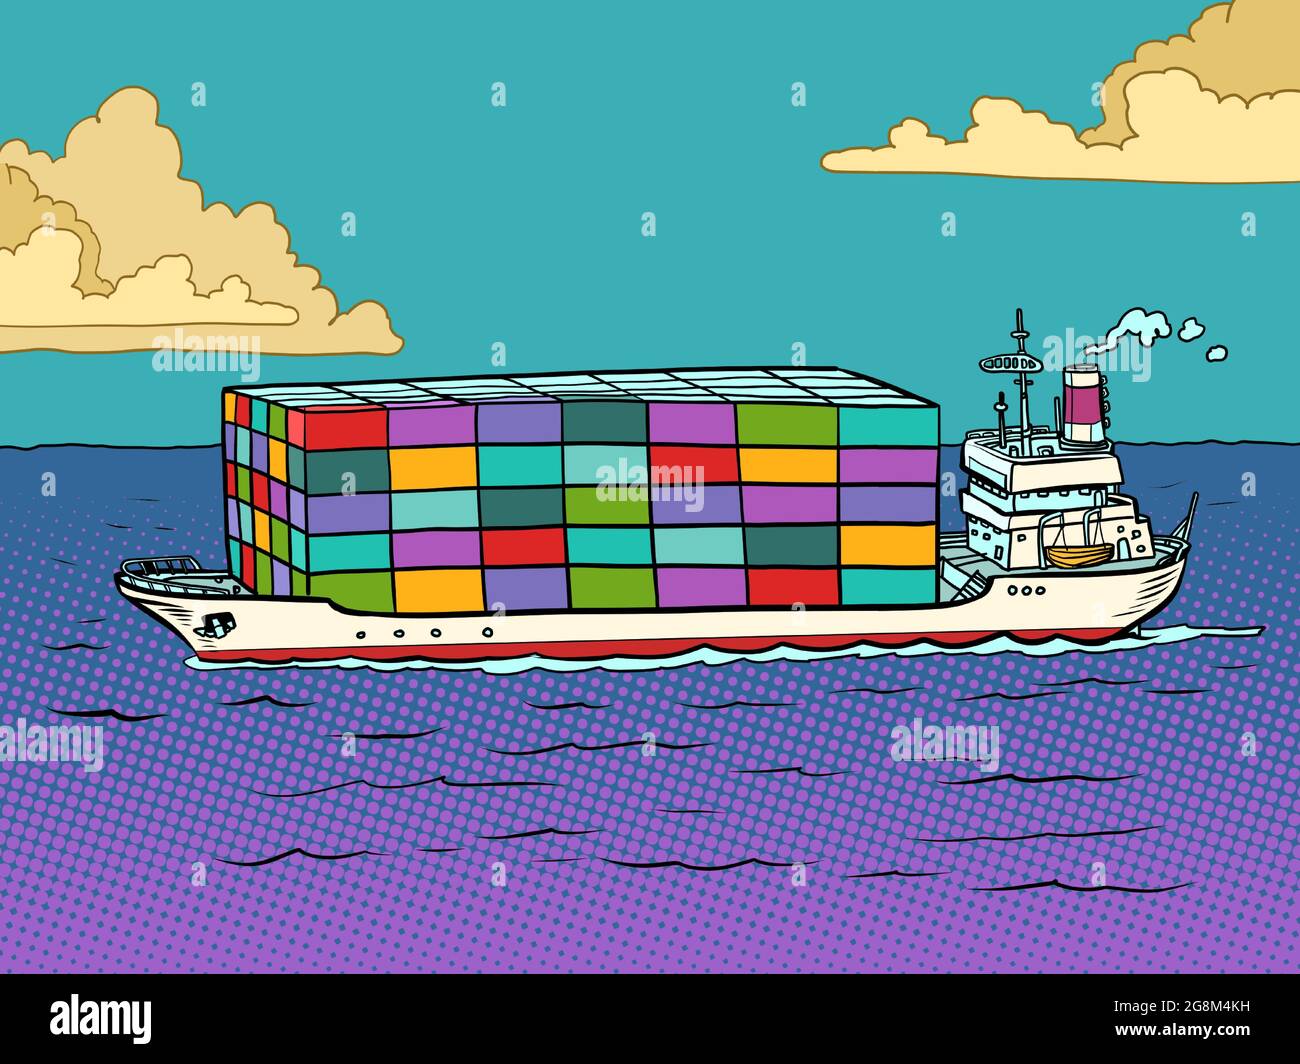 the ship is a sea container ship. Cargo transportation and logistics Stock Vector